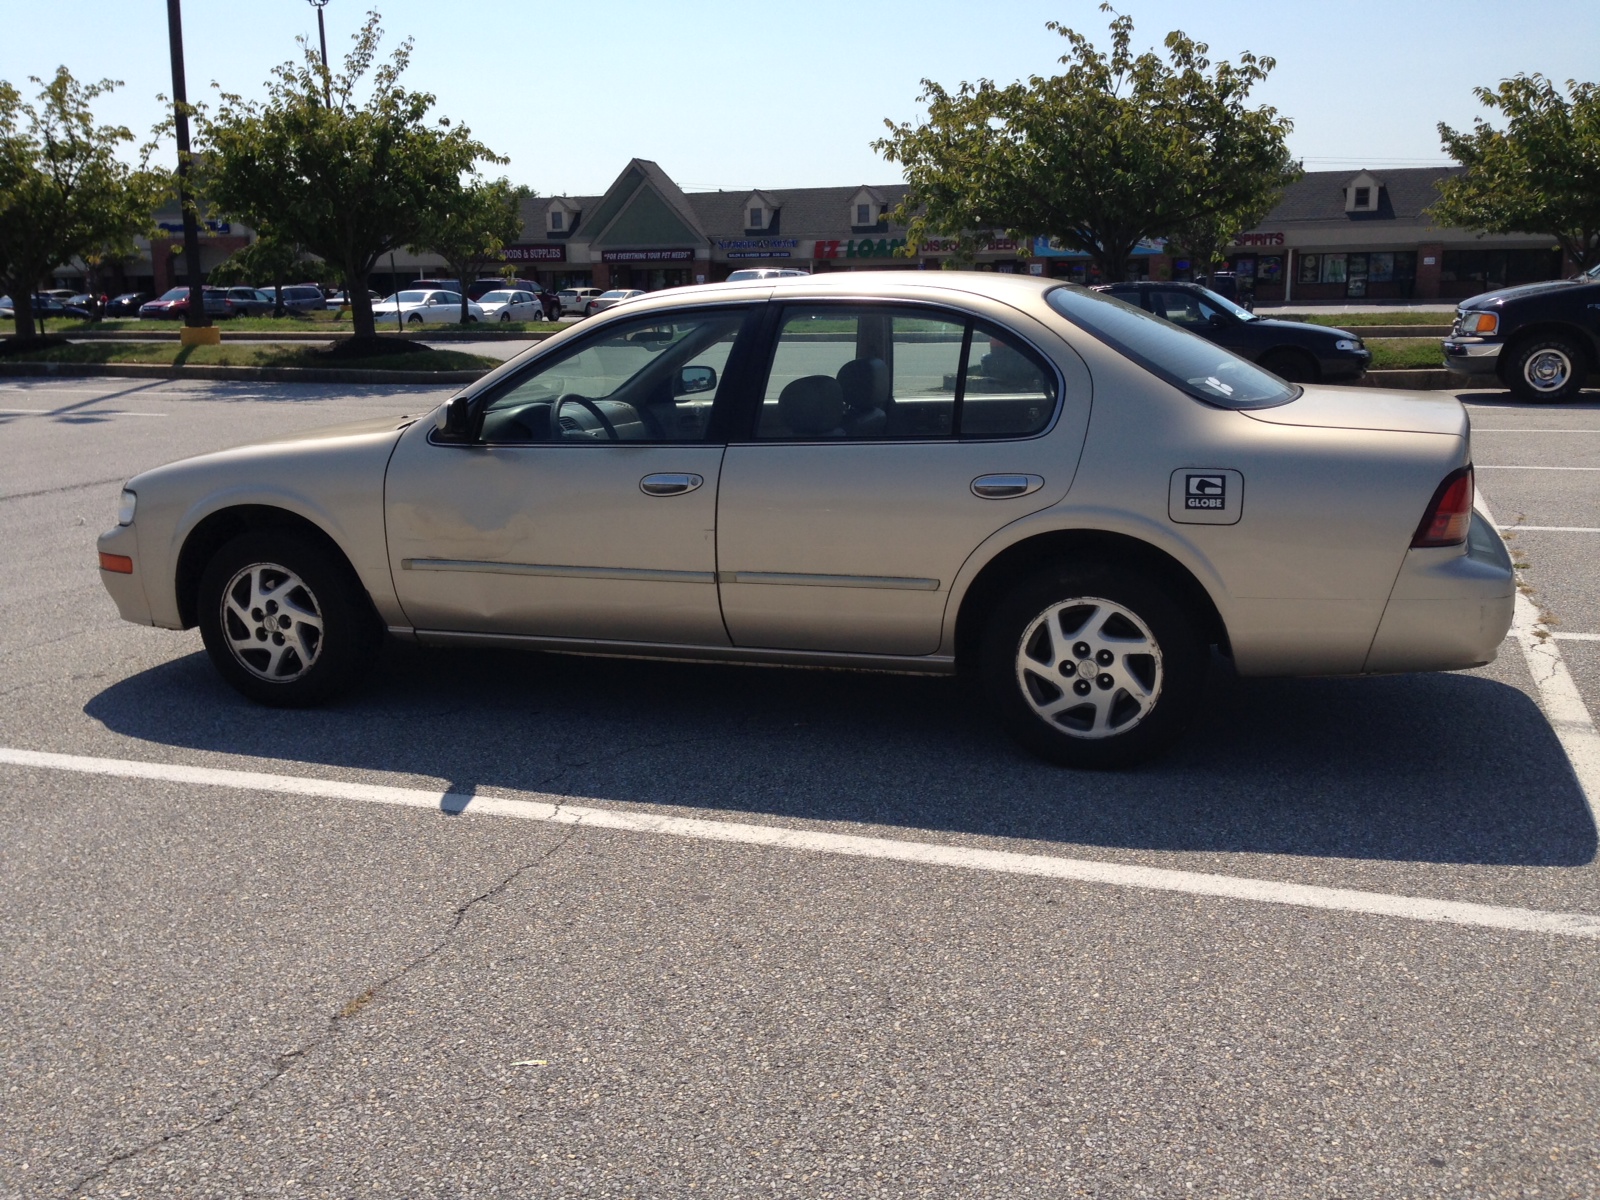 Kelley blue book value for a 1998 nissan maxima #7